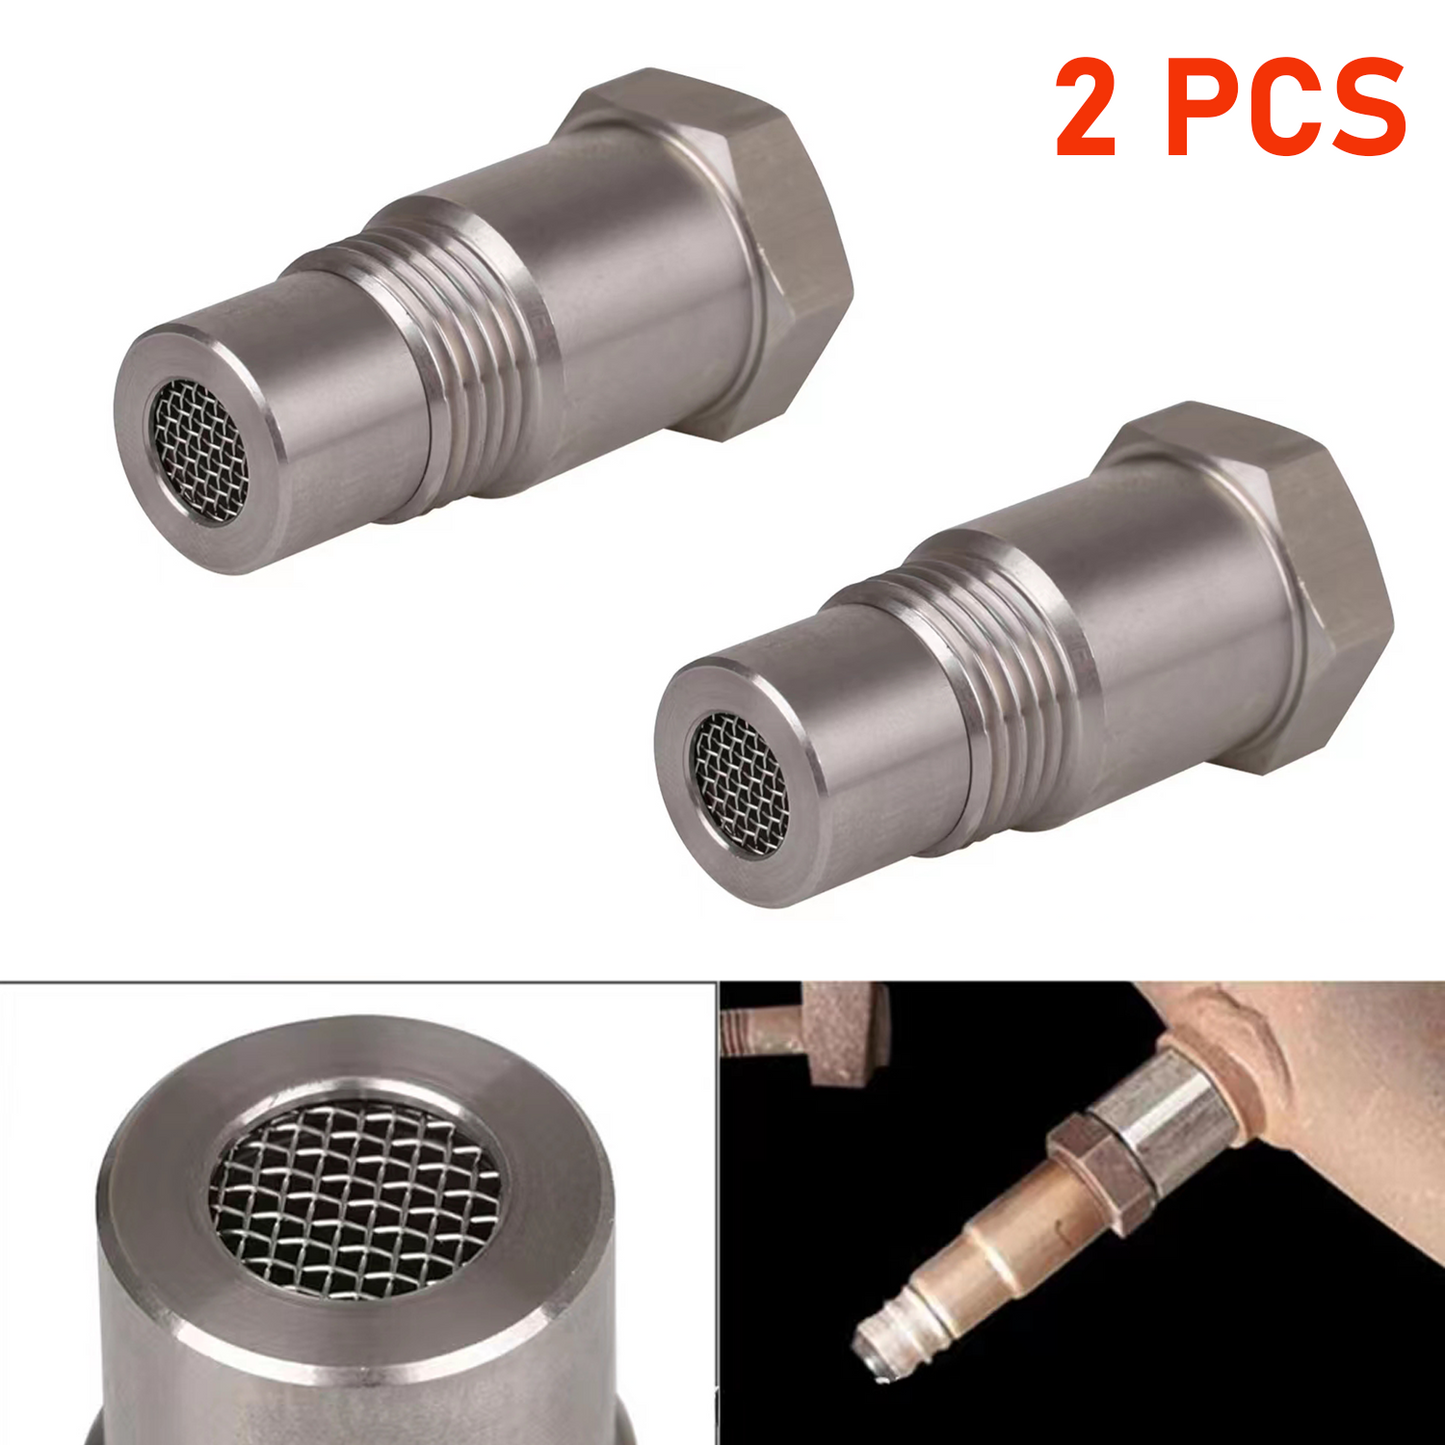 M18X1.5 Refill CO2 Valve Adapter Thread Converter Replacement For